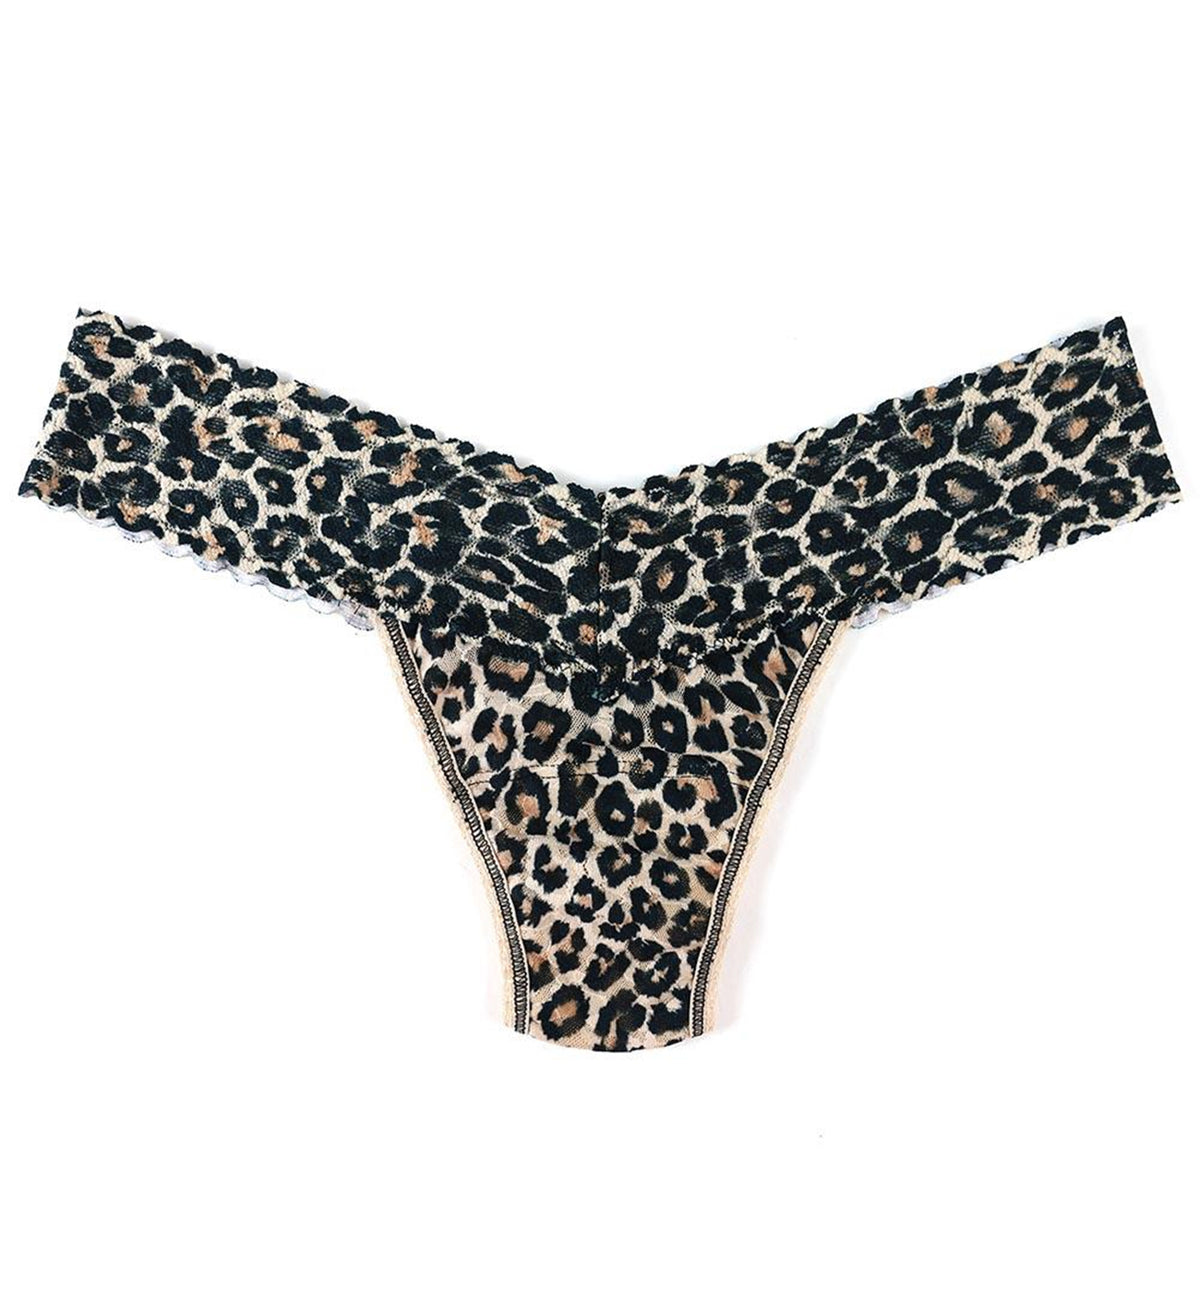 Hanky Panky Signature Lace Printed Low Rise Thong (PR4911P),Classic Leopard - Classic Leopard,One Size